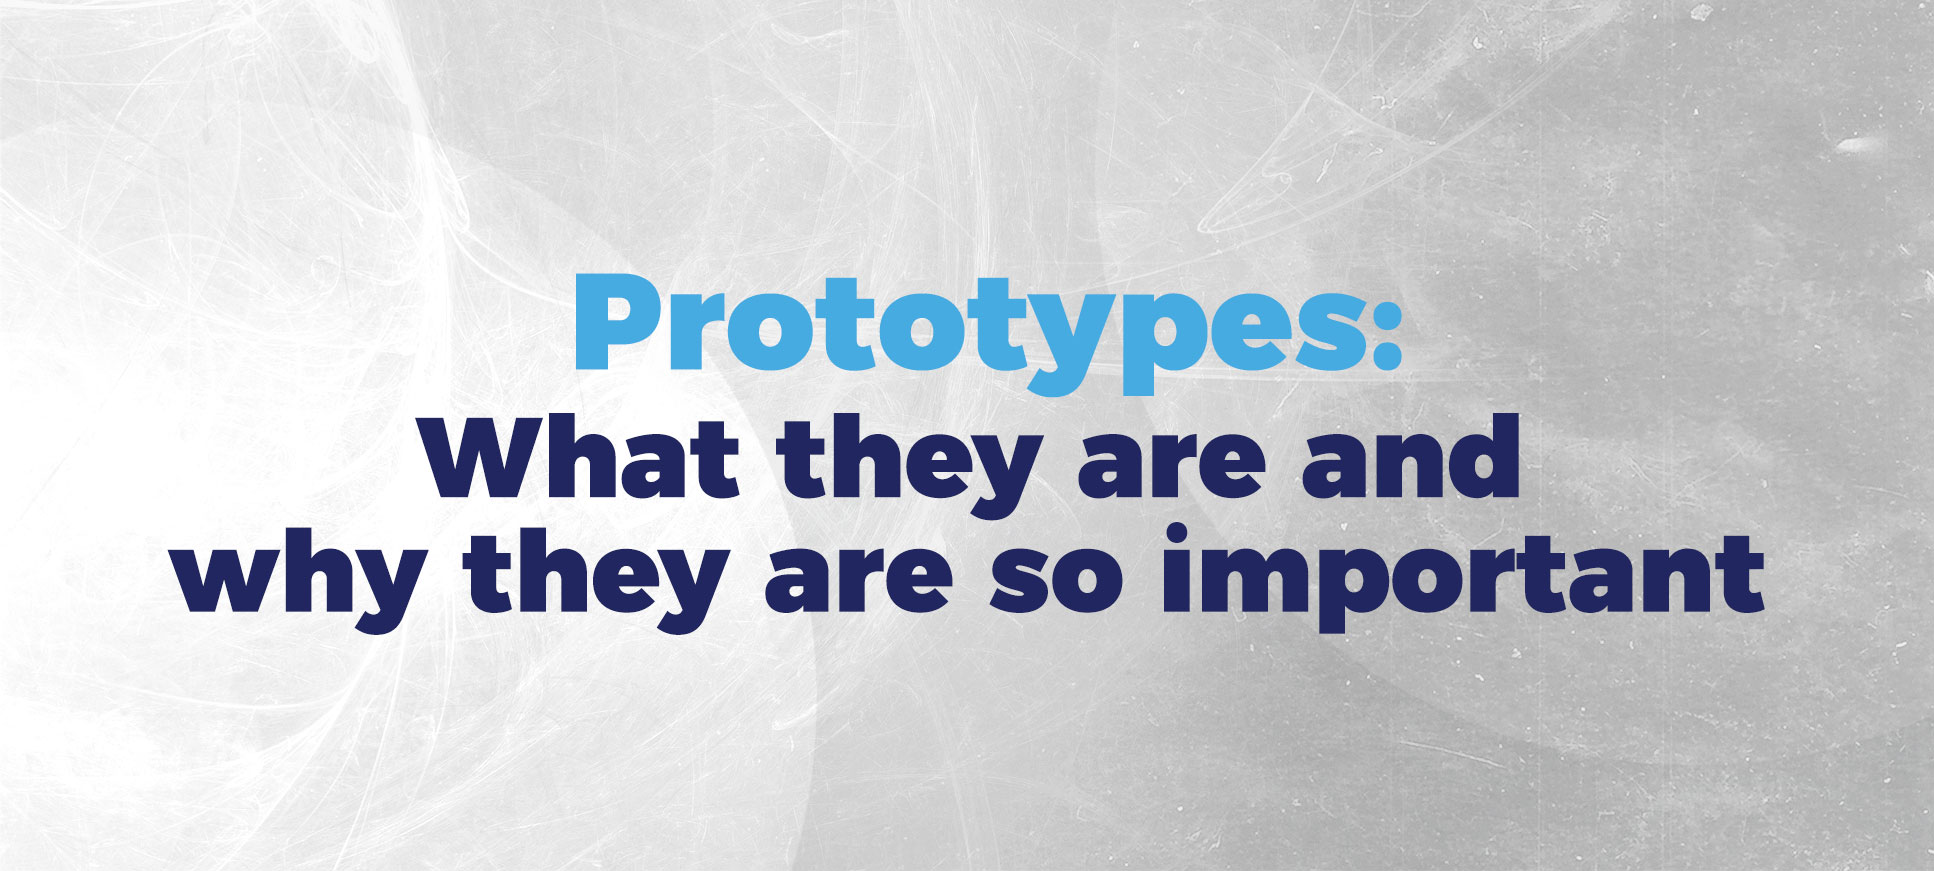 prototypes - what they are and why they are important